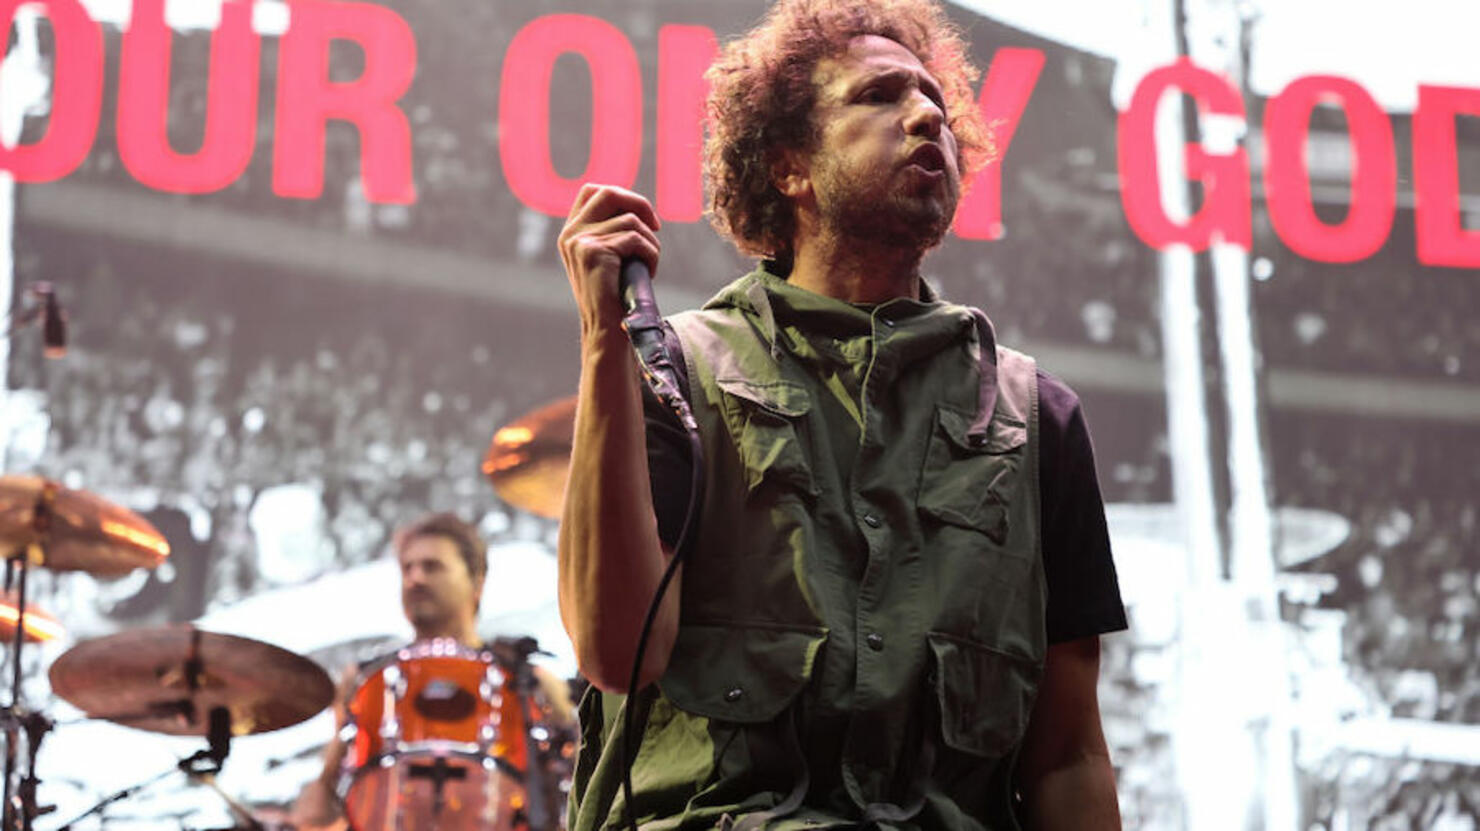 Rage Against The Machine In Concert - New York, NY